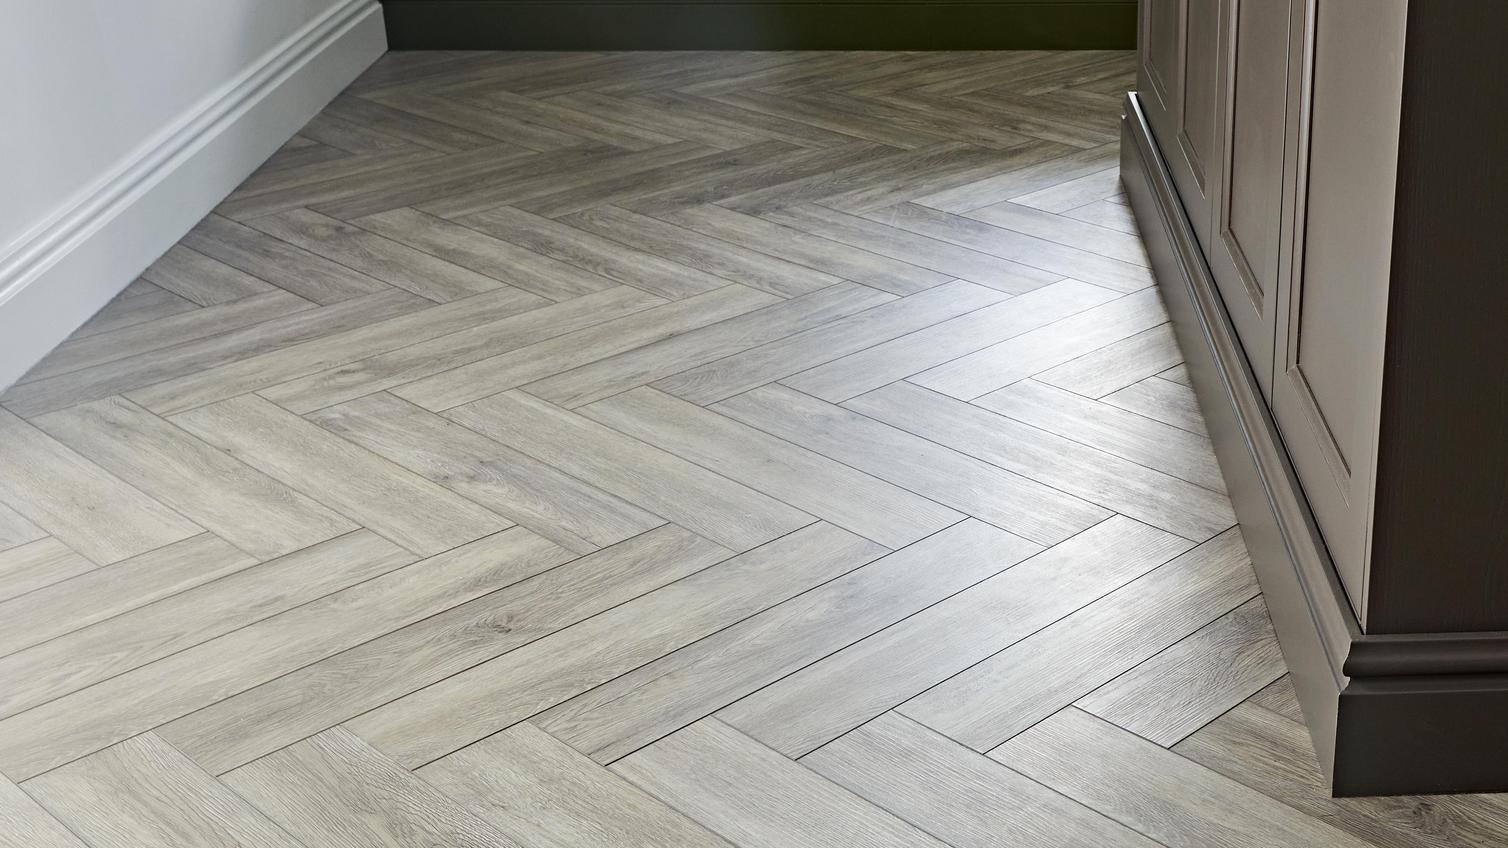 Oak-effect vinyl flooring in a chevron-style layout. It is fitted alongside brown and green kitchen cabinets.